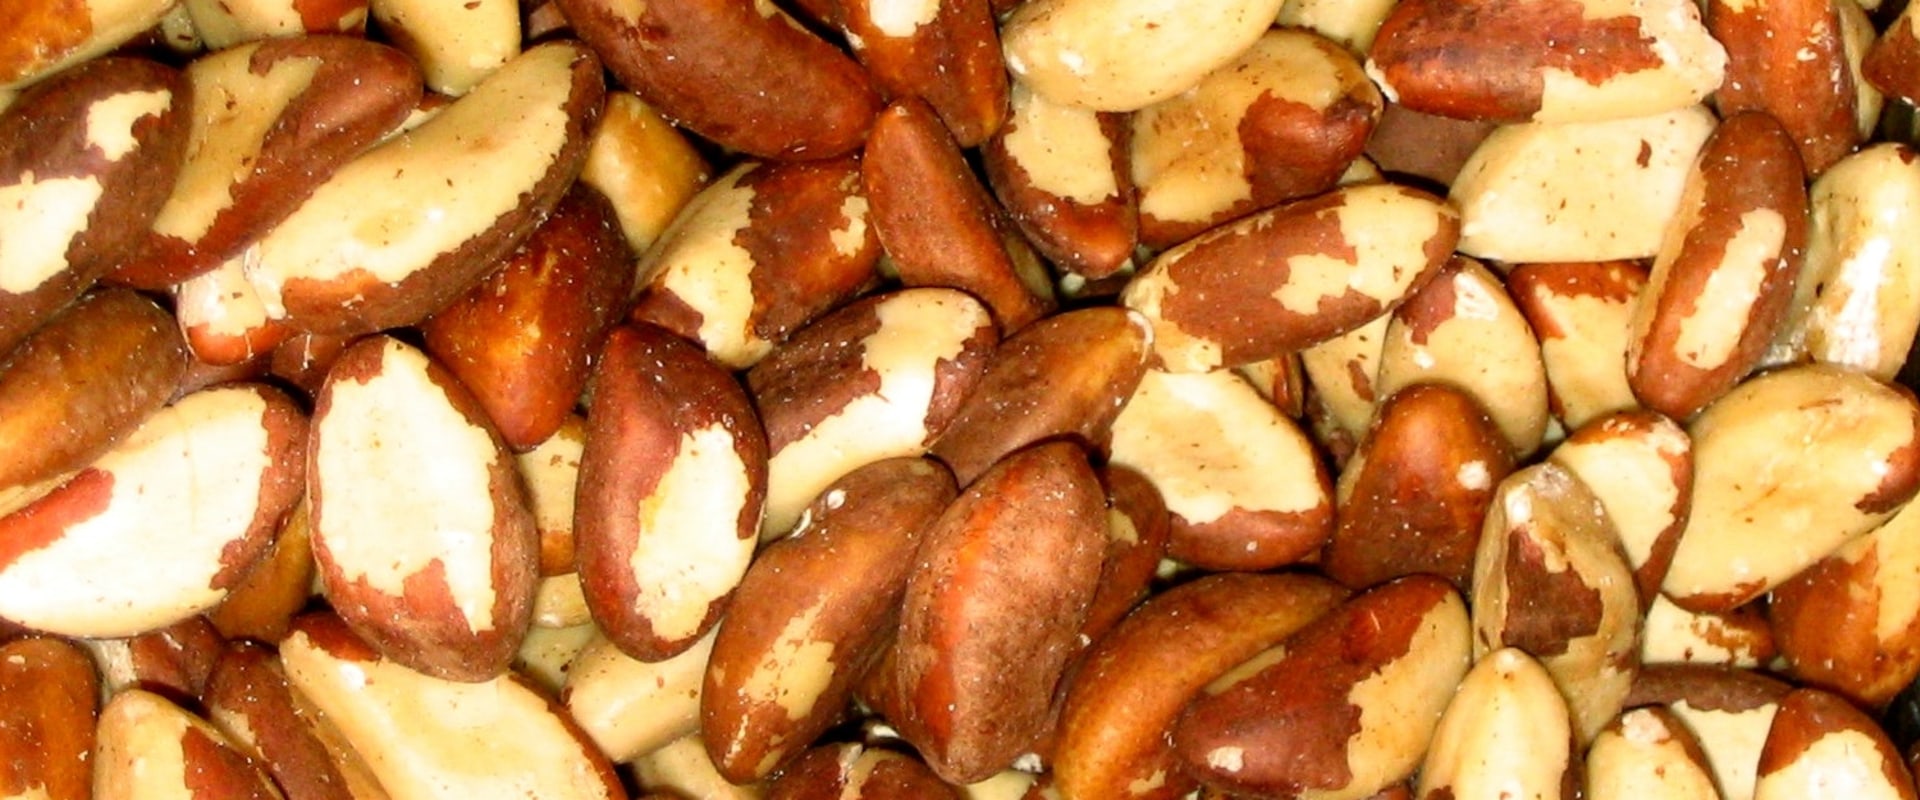 Is there still a shortage of brazil nuts?